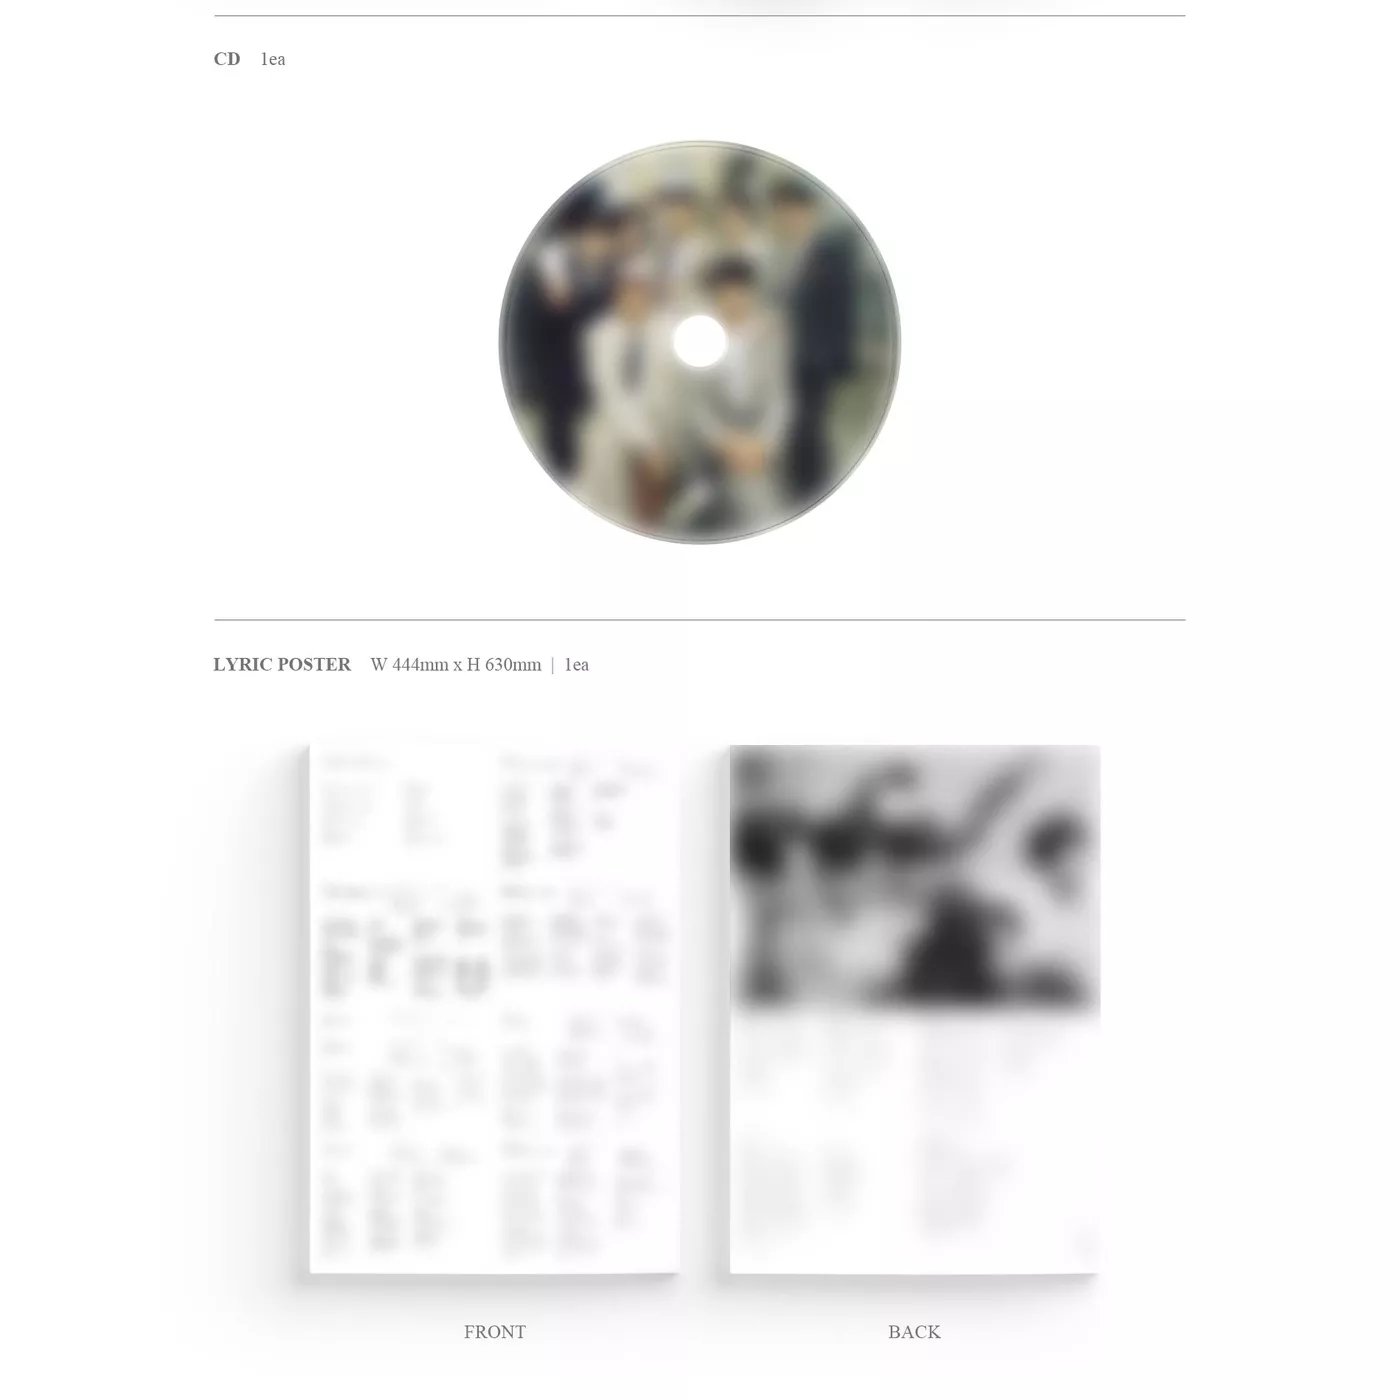 BTS - BE (Deluxe Edition) (CD) - image 4 of 10